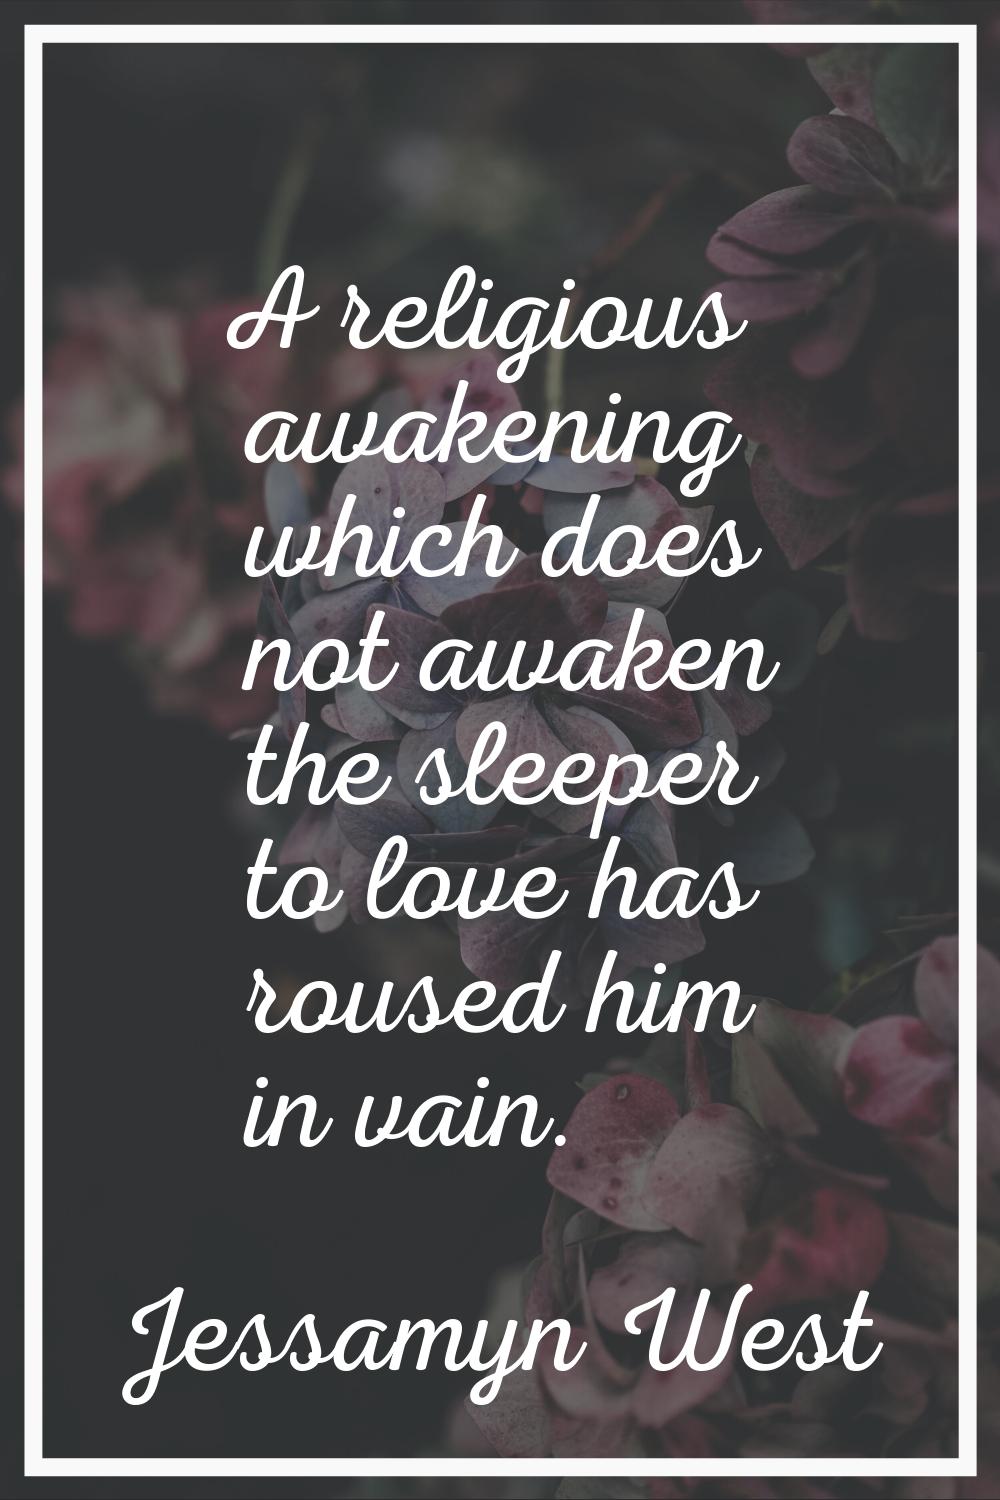 A religious awakening which does not awaken the sleeper to love has roused him in vain.